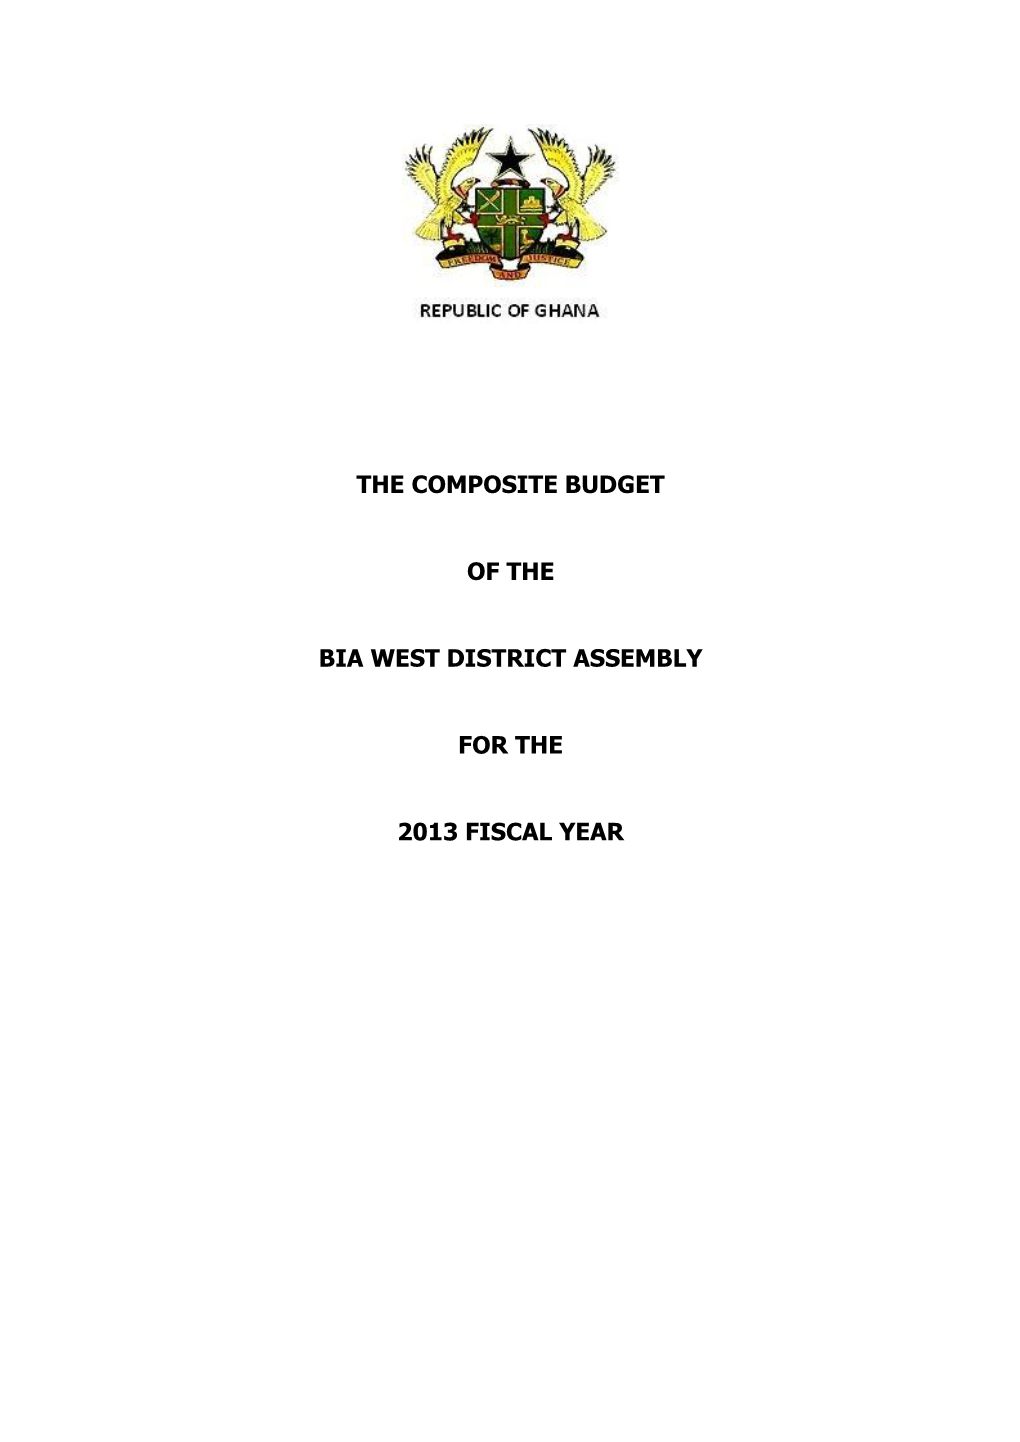 The Composite Budget of the Bia West District Assembly for the 2013 Fiscal